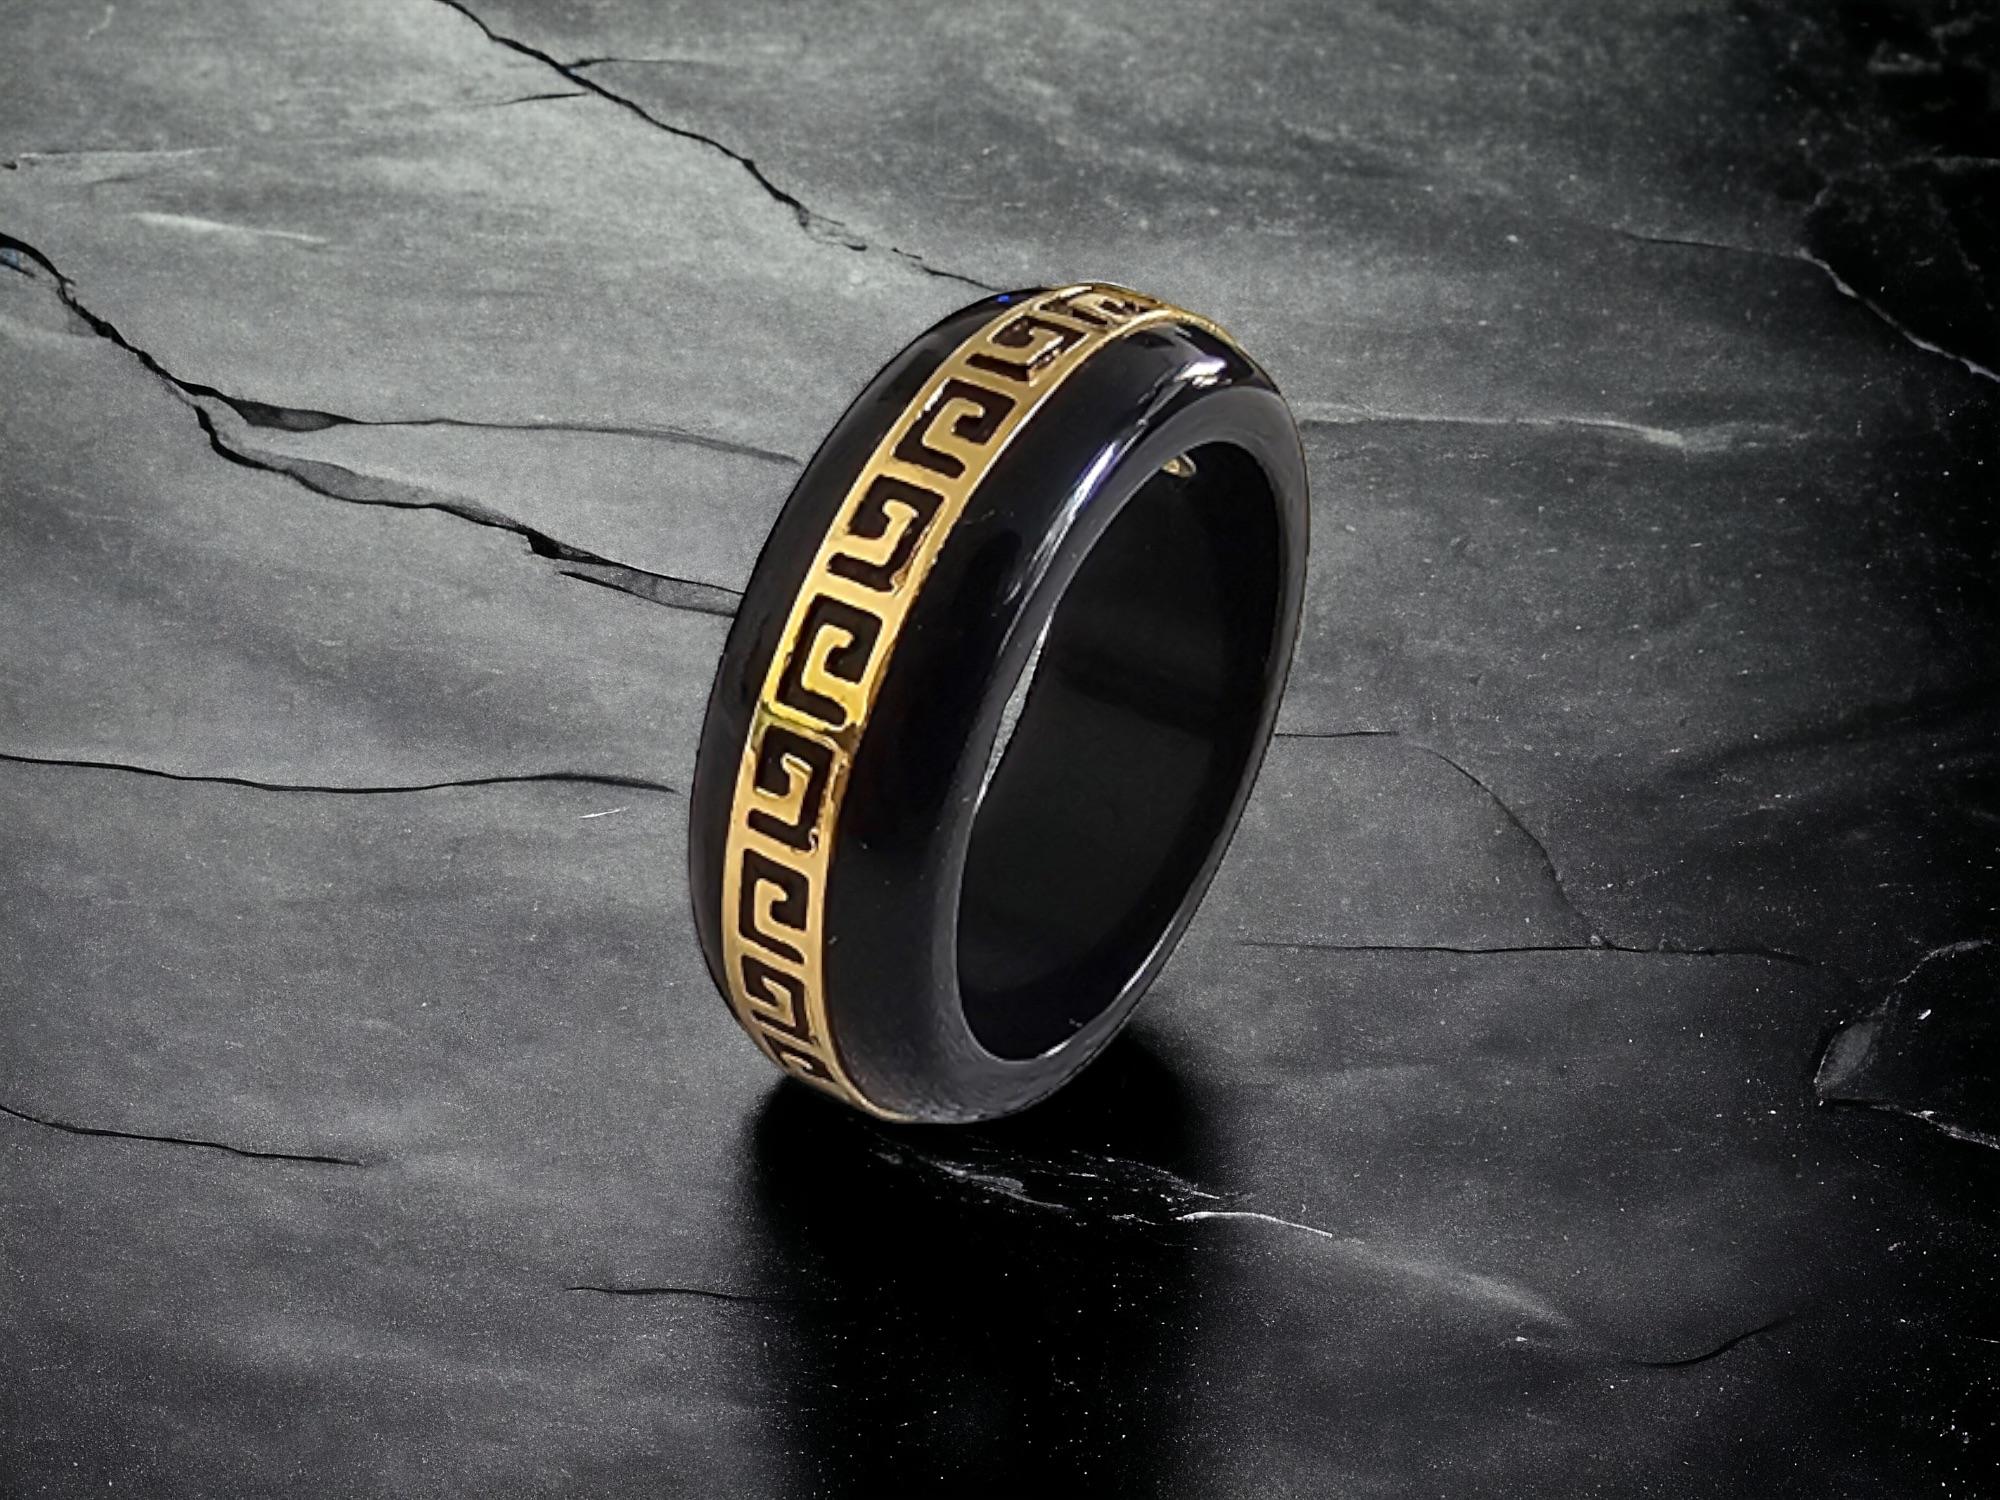 Black Onyx Band Ring with solid 14K Yellow Gold (Hallmark Stamped) for men and women (unisex). 

The infinity band style is perfect for casual and formal wear, easy to dress up. 

The 'Li' rings are named after the Chinese character for Strength. A